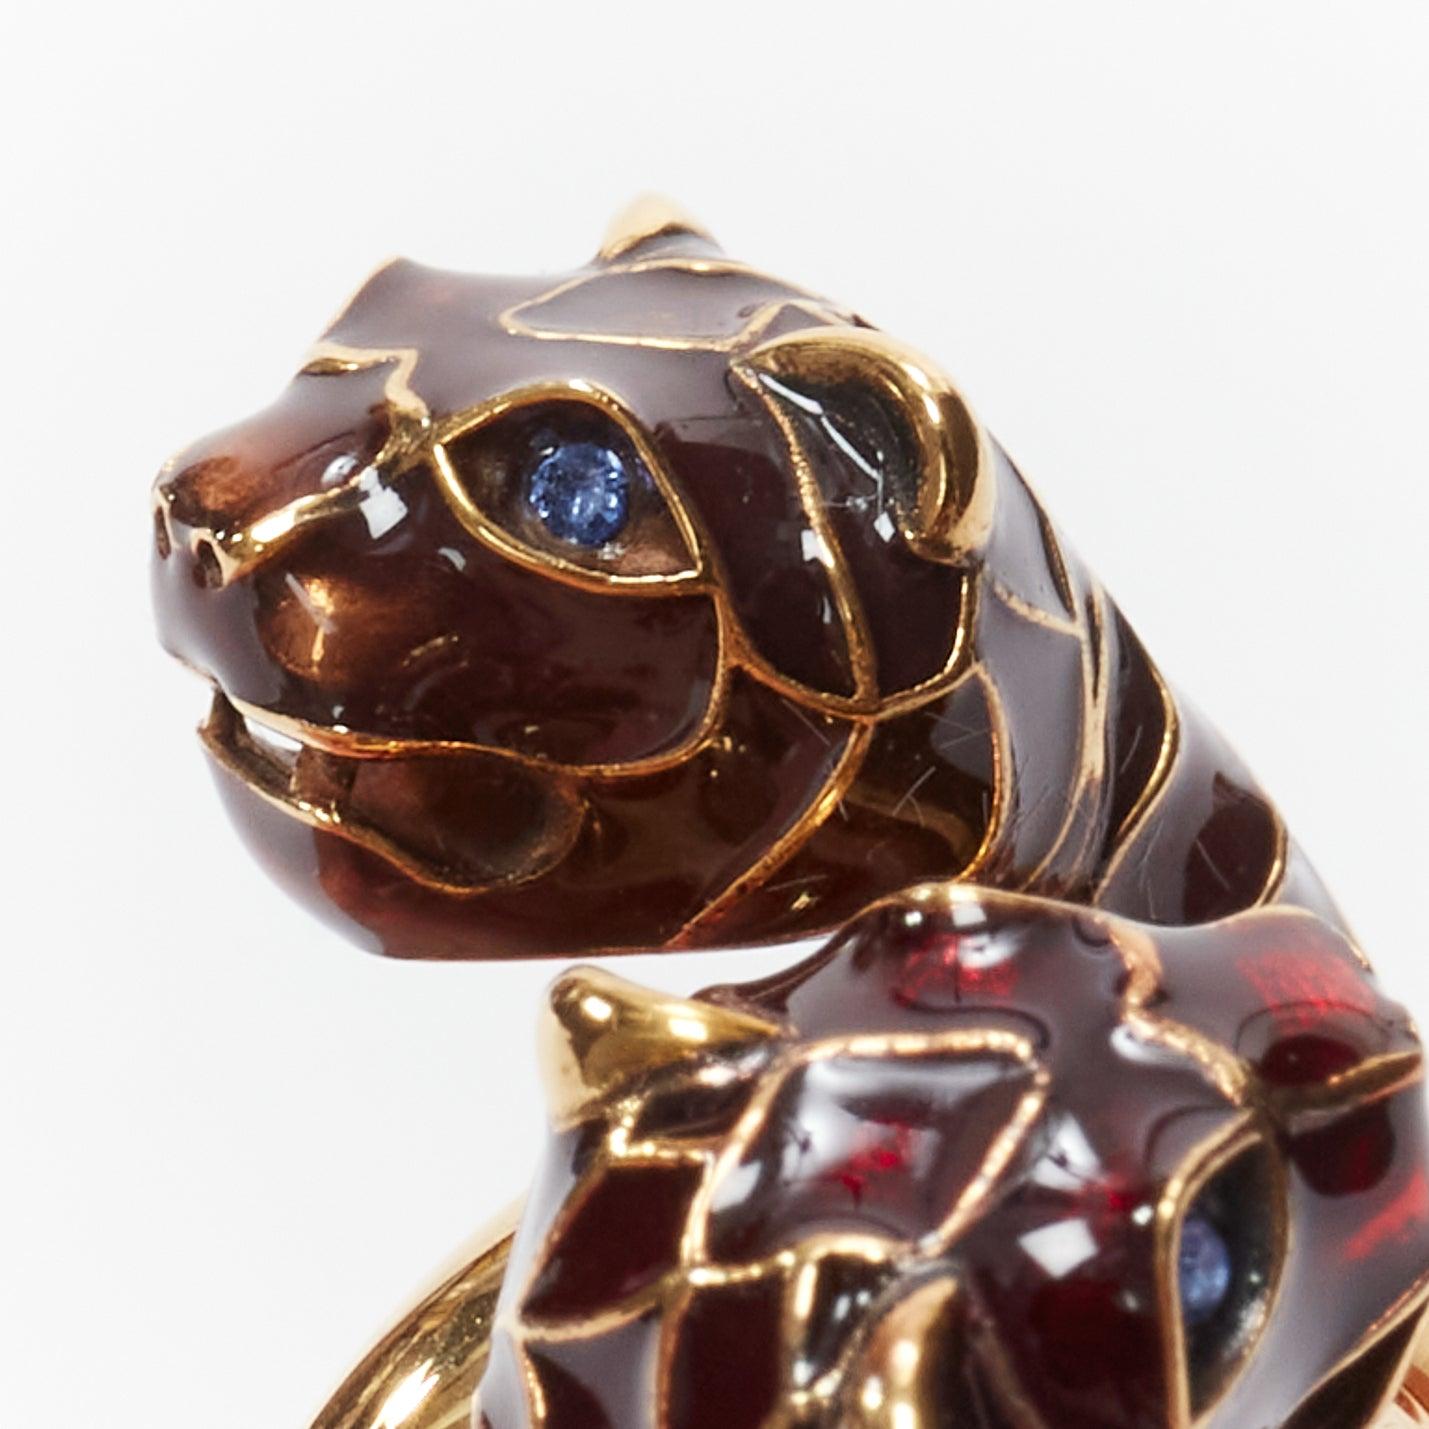 GUCCI Alessandro Michele gold double tiger head enamel crystal ring Sz10
Reference: BSHW/A00125
Brand: Gucci
Designer: Alessandro Michele
Material: Metal
Color: Gold, Multicolour
Pattern: Solid
Closure: Pull On
Lining: Metallic Metal
Made in: